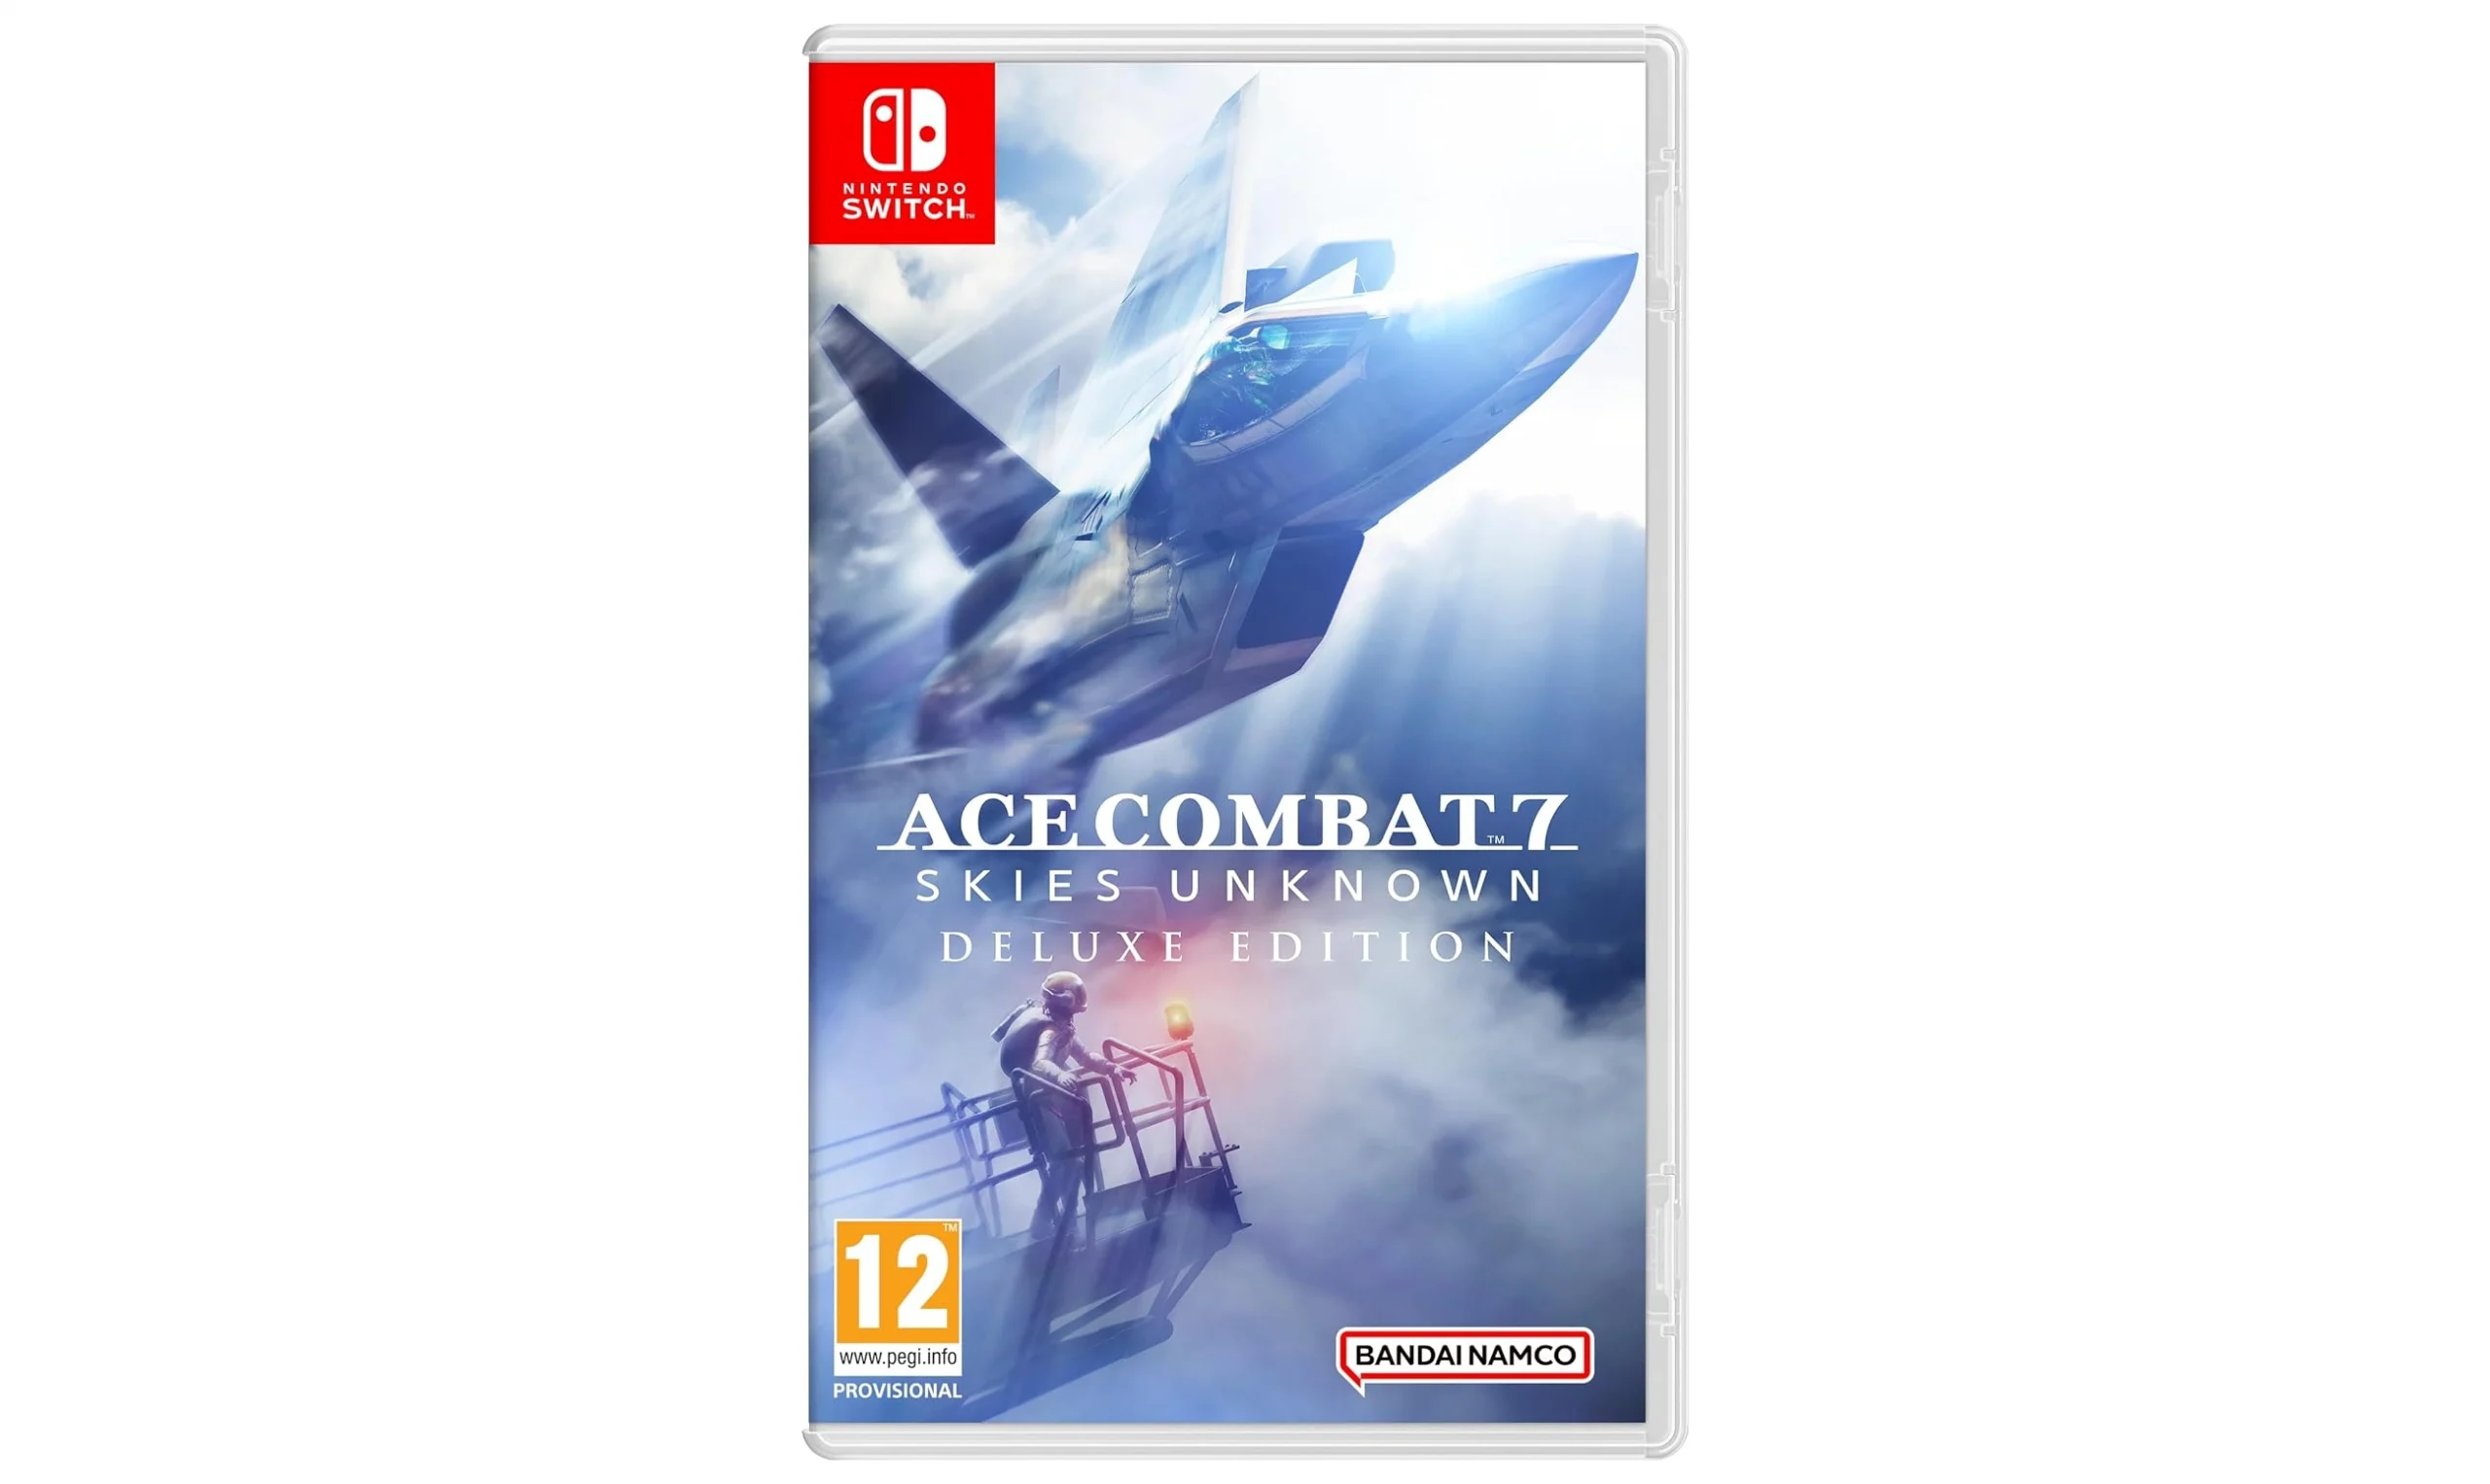 Ace Combat 7 physical Switch